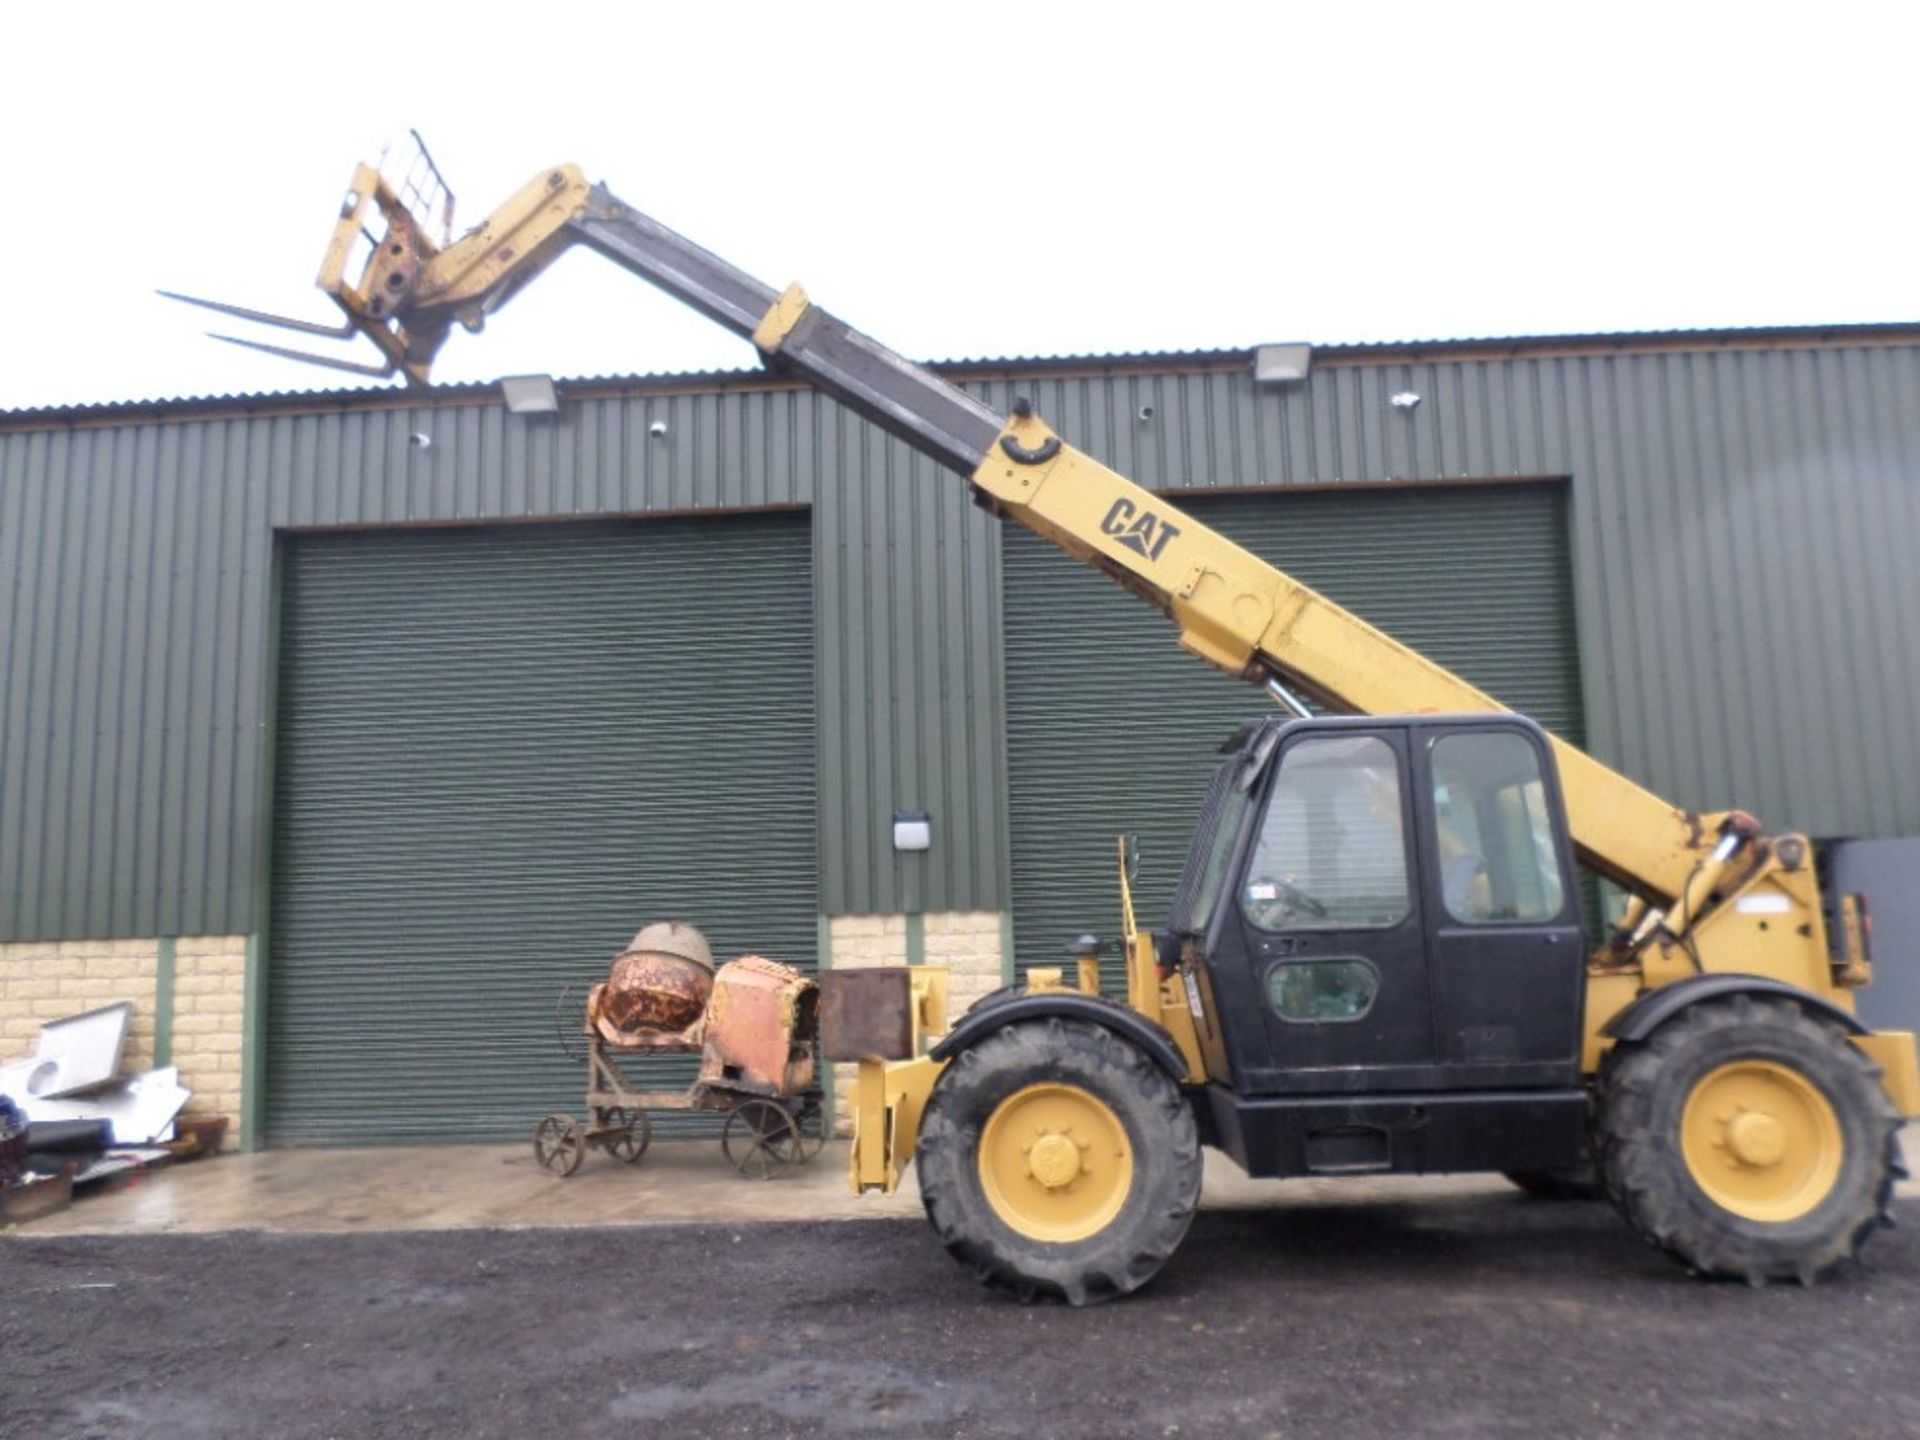 1999 CAT TH63 TELEPORTER (LOCATION SHEFFIELD) 5612 HOURS (RING FOR COLLECTION DETAILS) [+ VAT] - Image 5 of 13